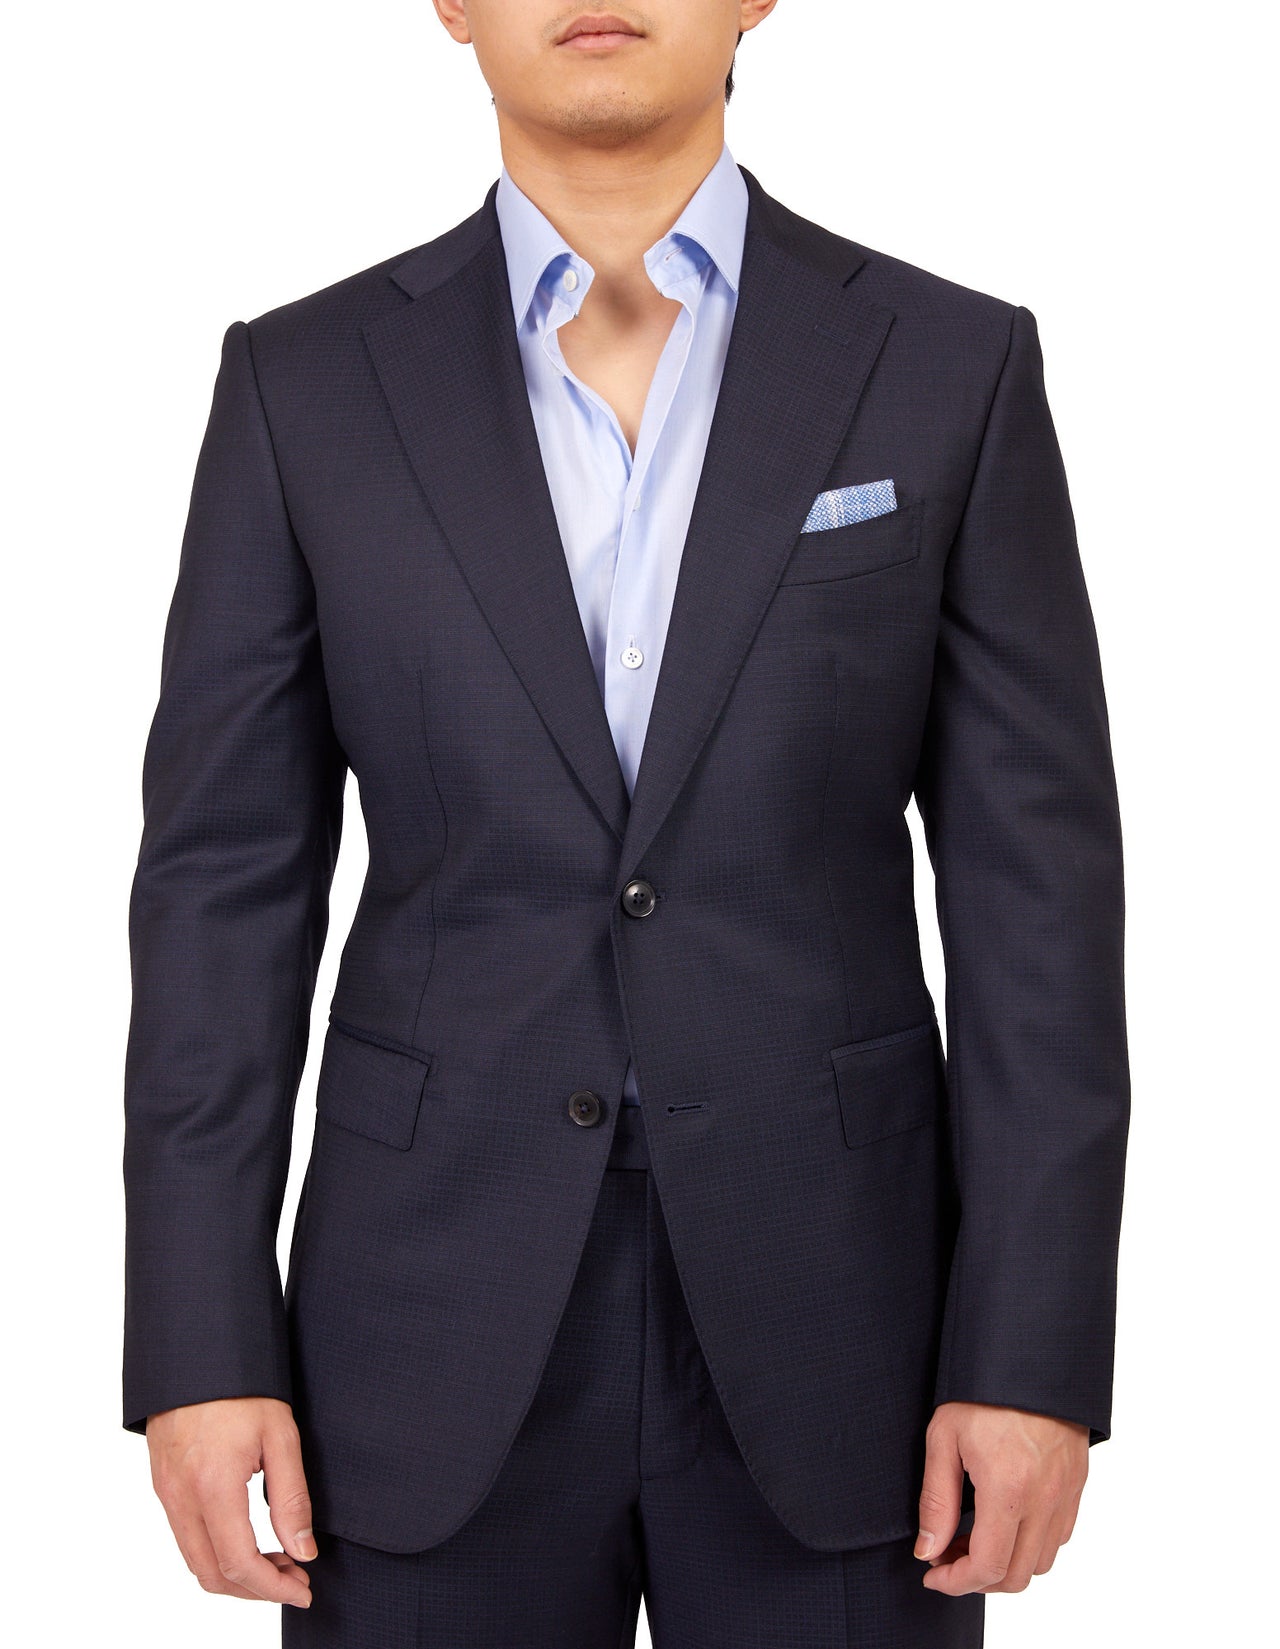 HENRY SARTORIAL X DORMEUIL Small Pattern Suit NAVY LG